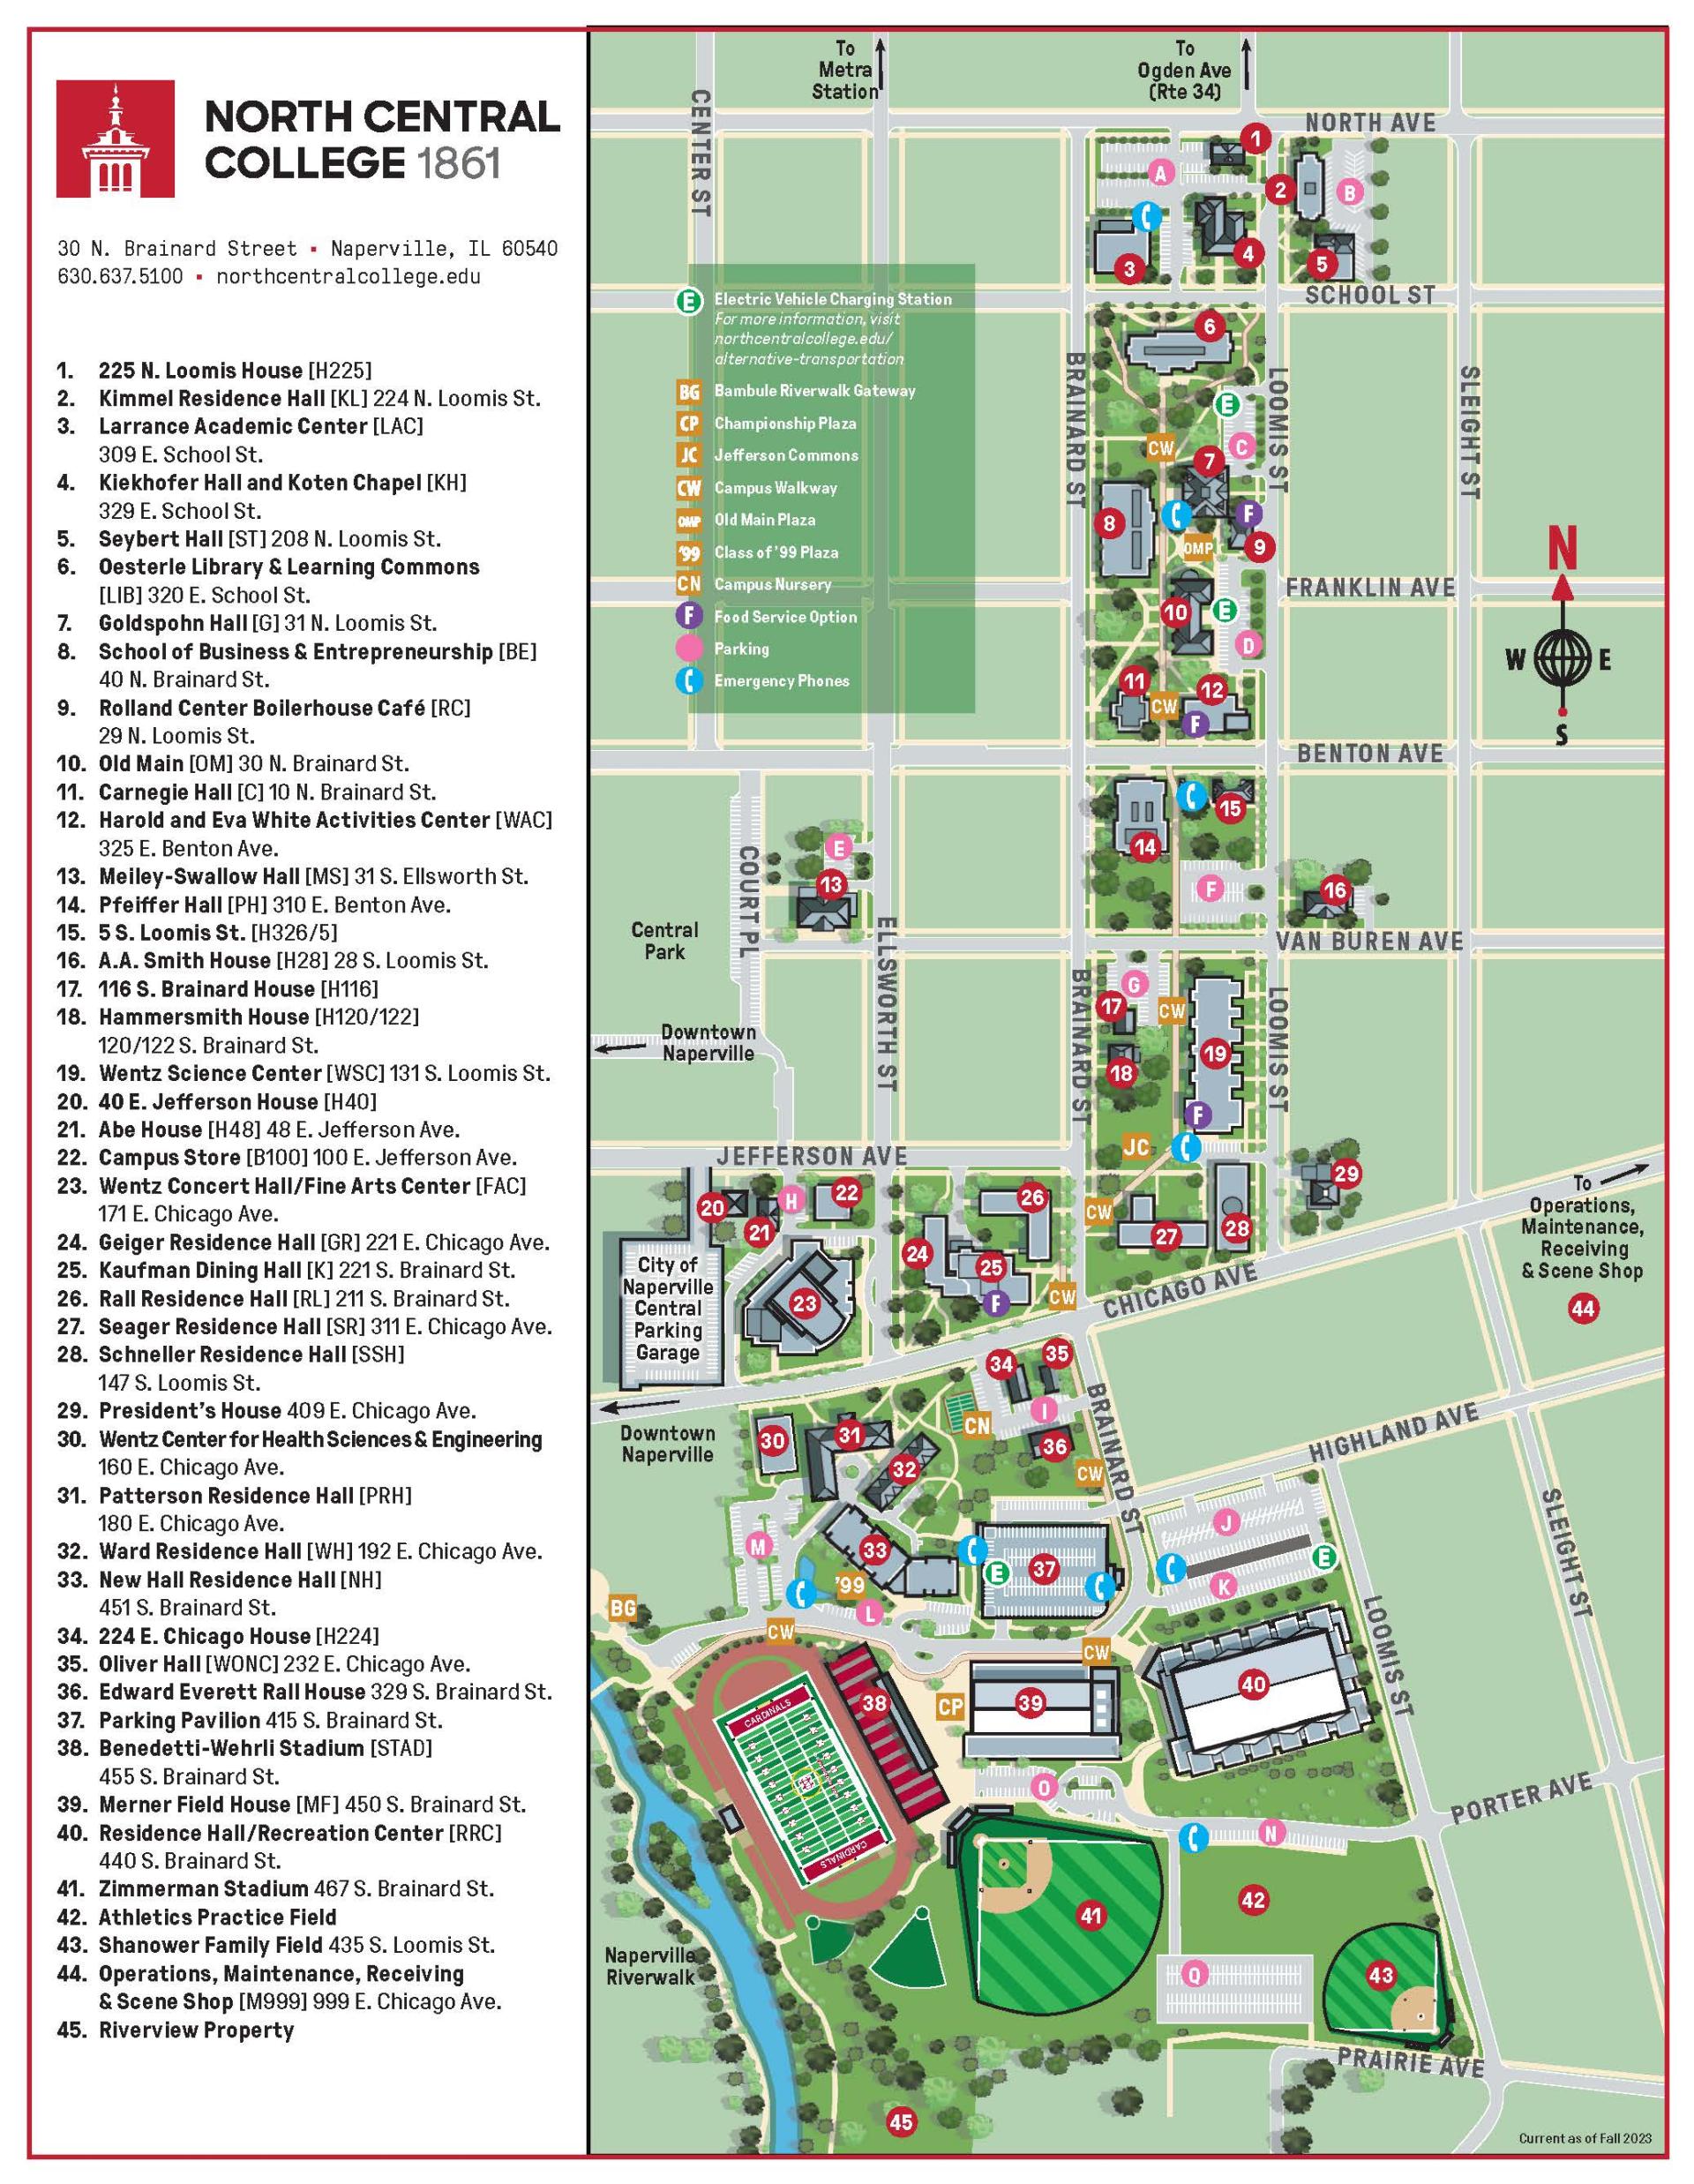 A map of the North Central College campus.